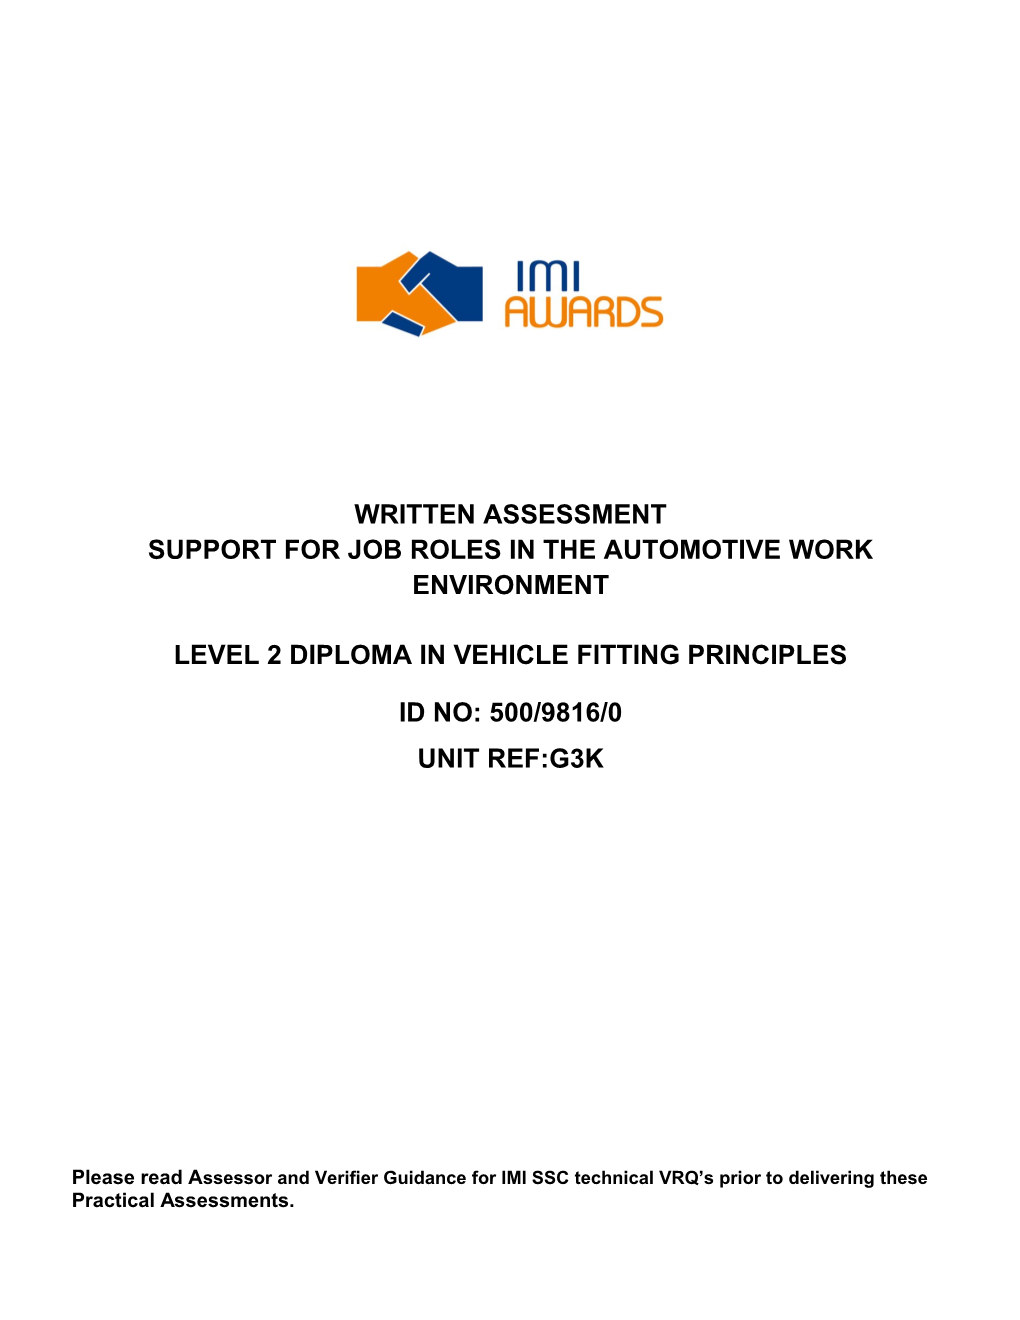 Support for Job Roles in the Automotive Work Environment